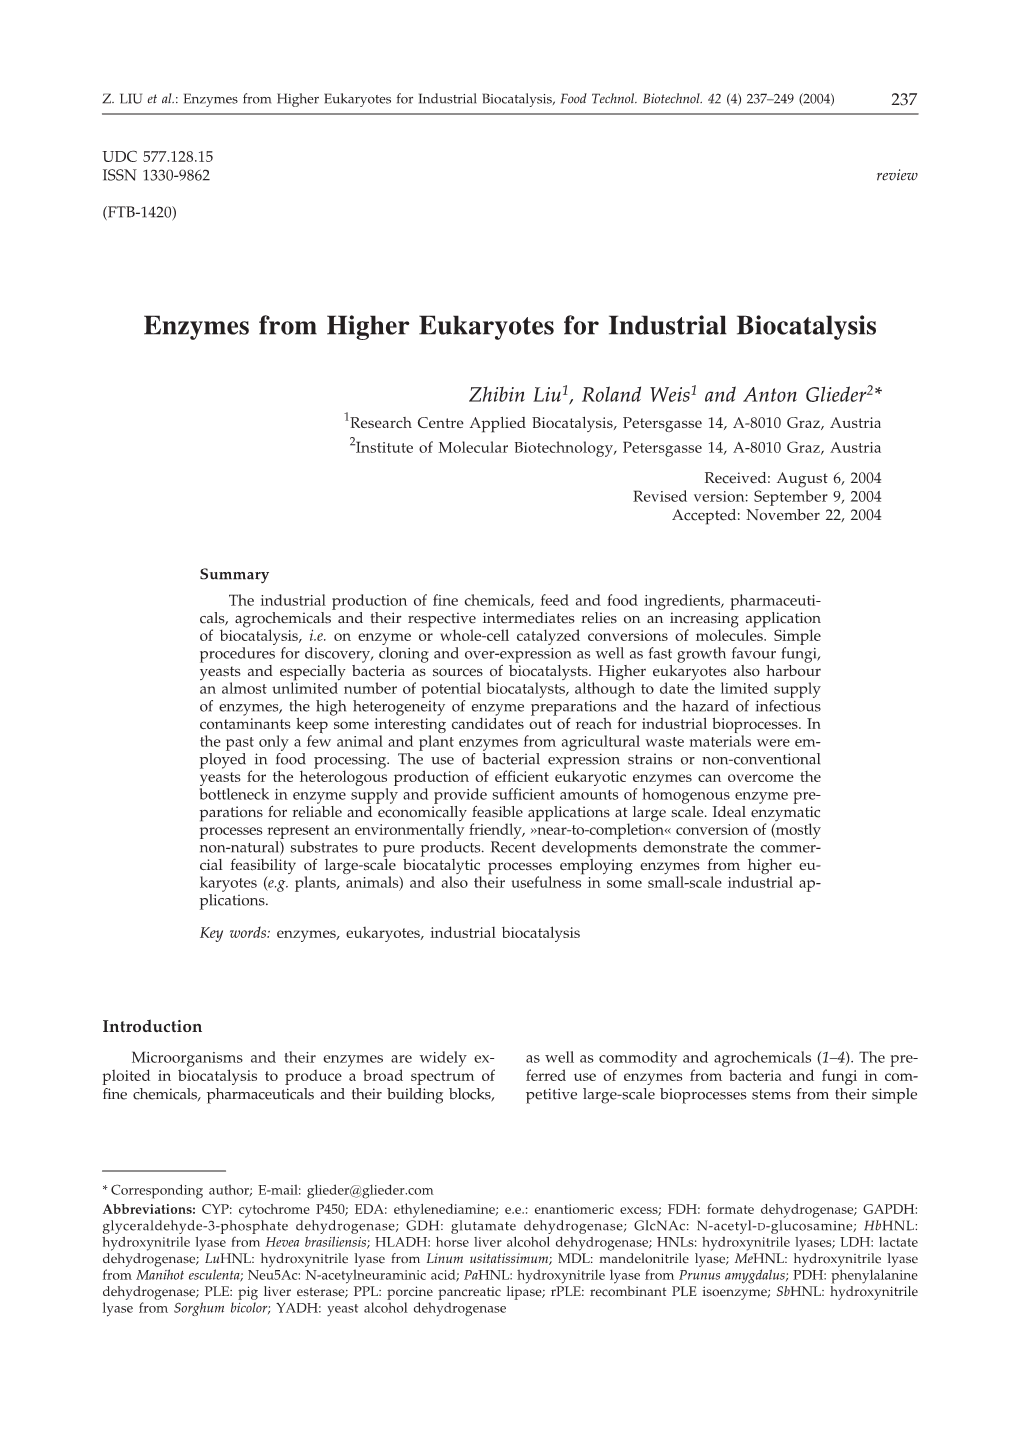 Enzymes from Higher Eukaryotes for Industrial Biocatalysis, Food Technol